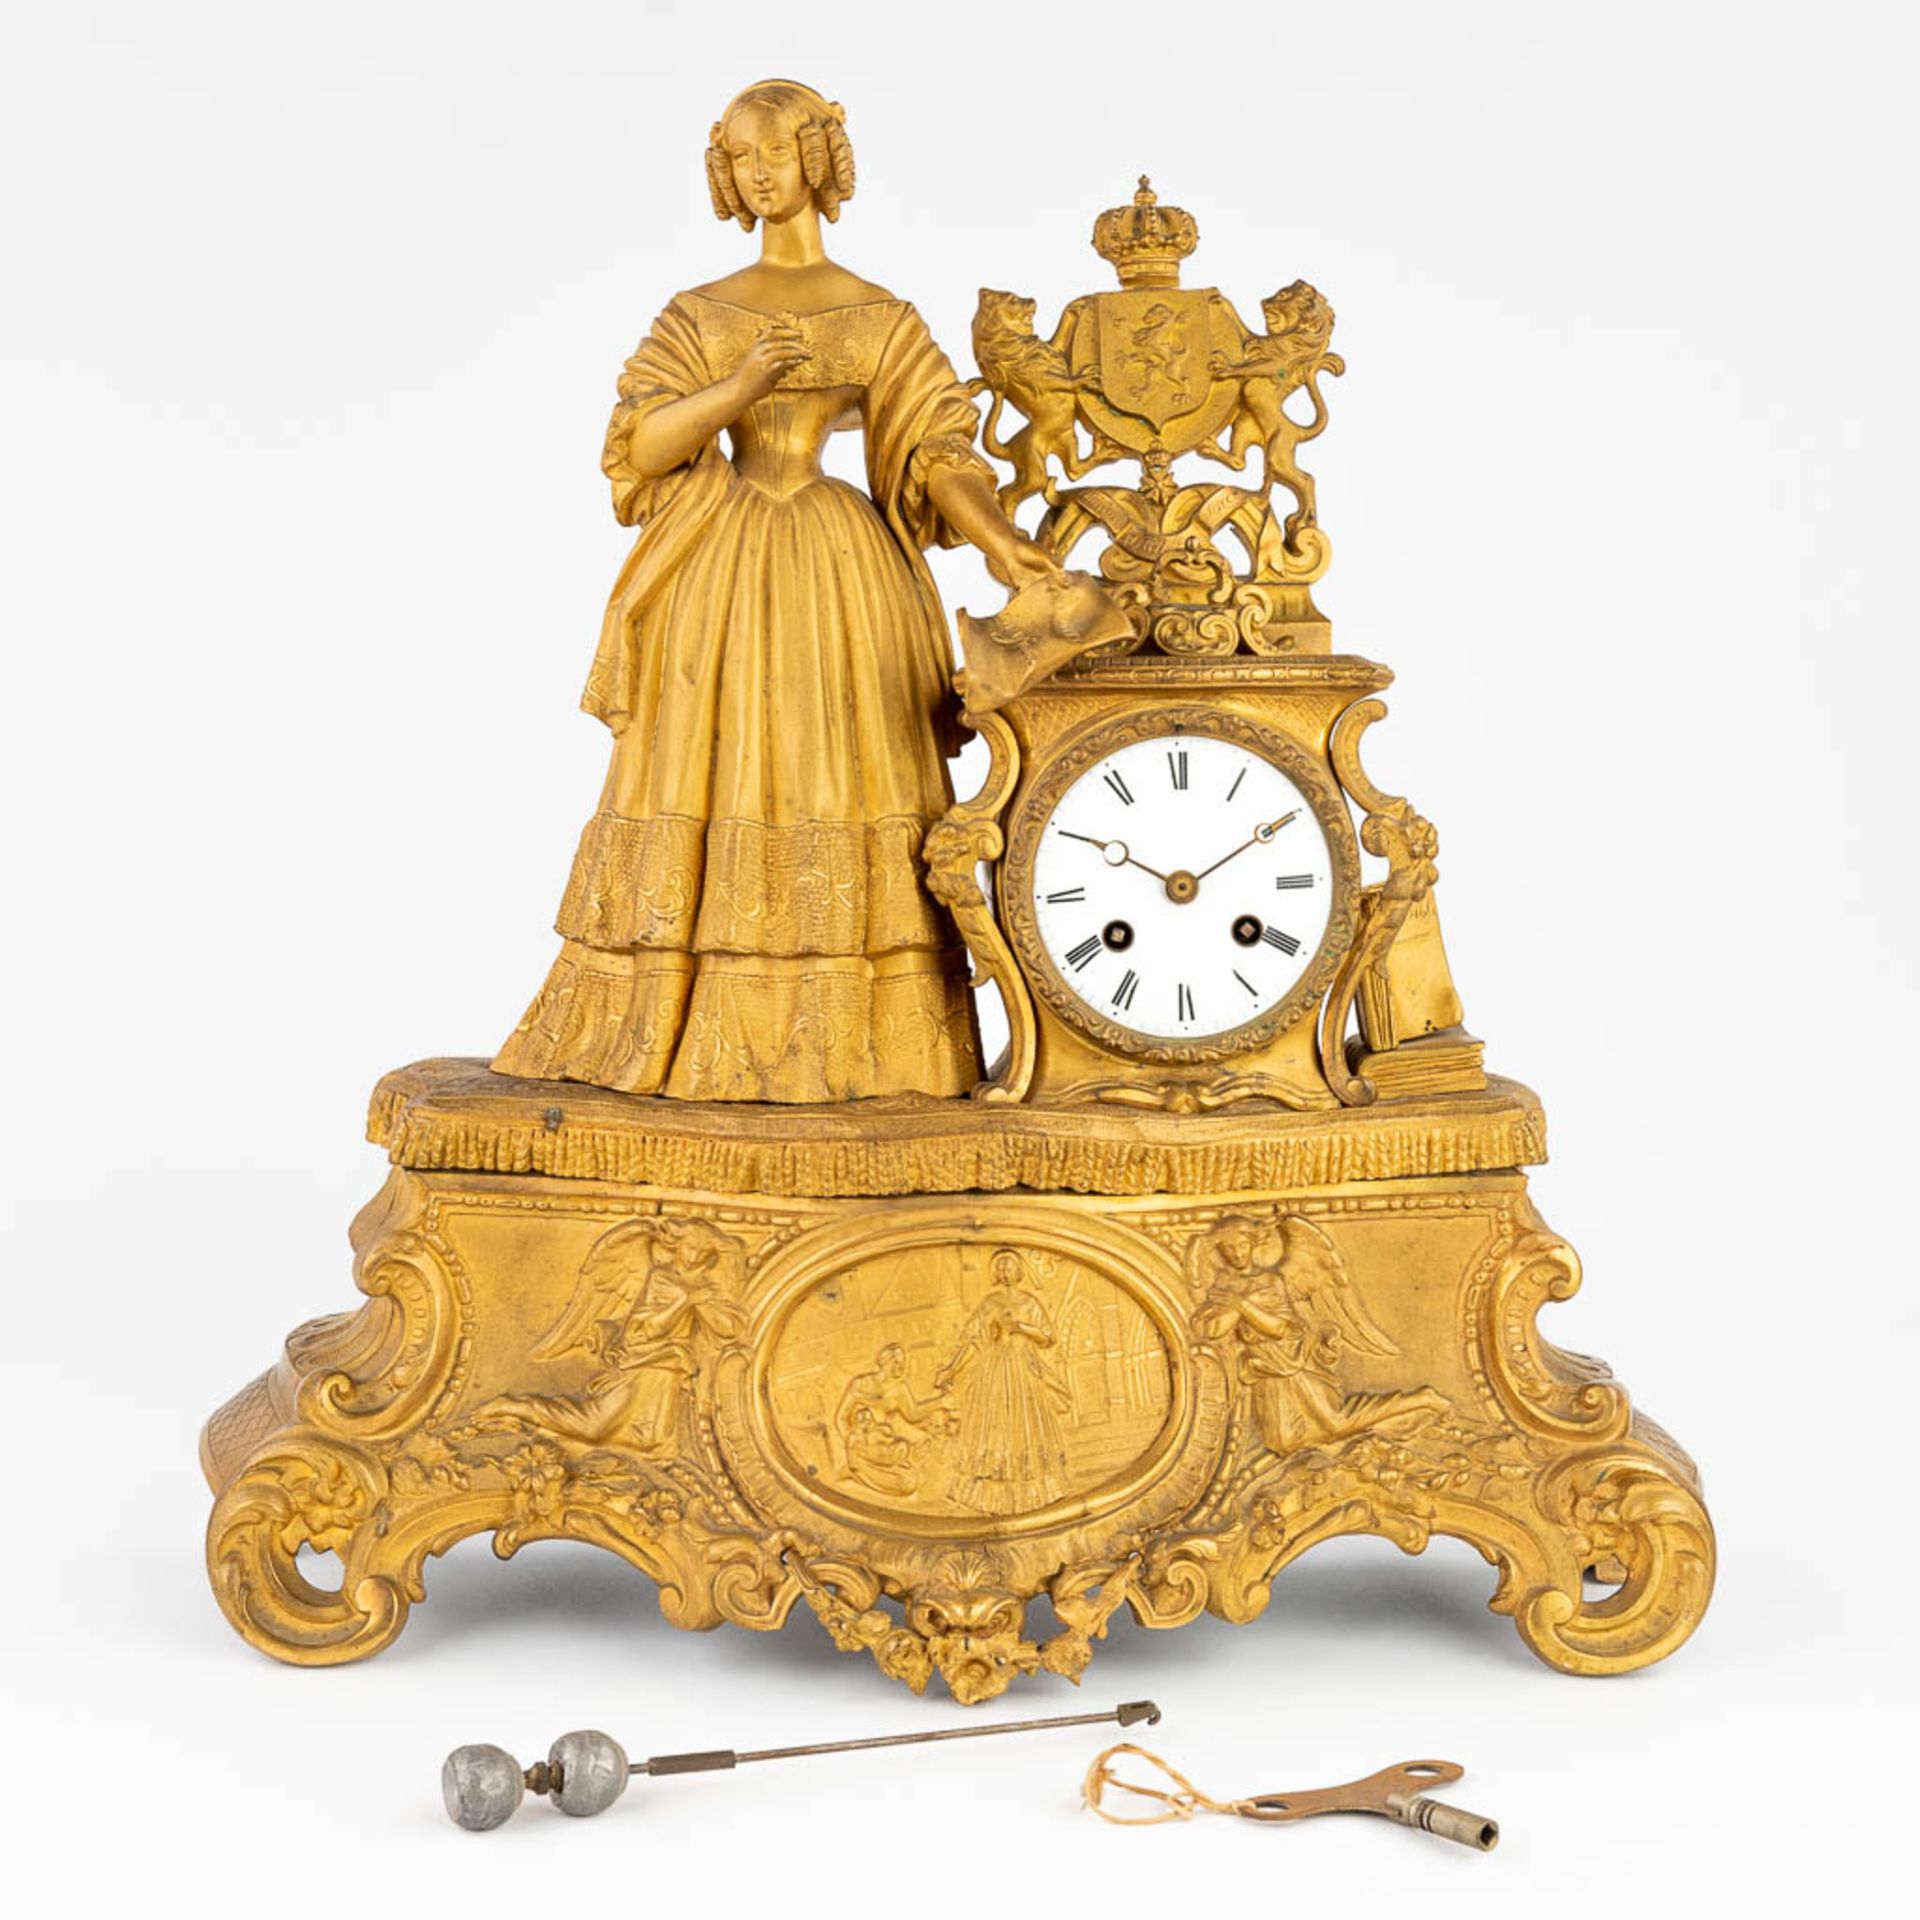 An antique mantle clock made of gilt spelter. 19th C. (44 x 45cm) - Image 14 of 16